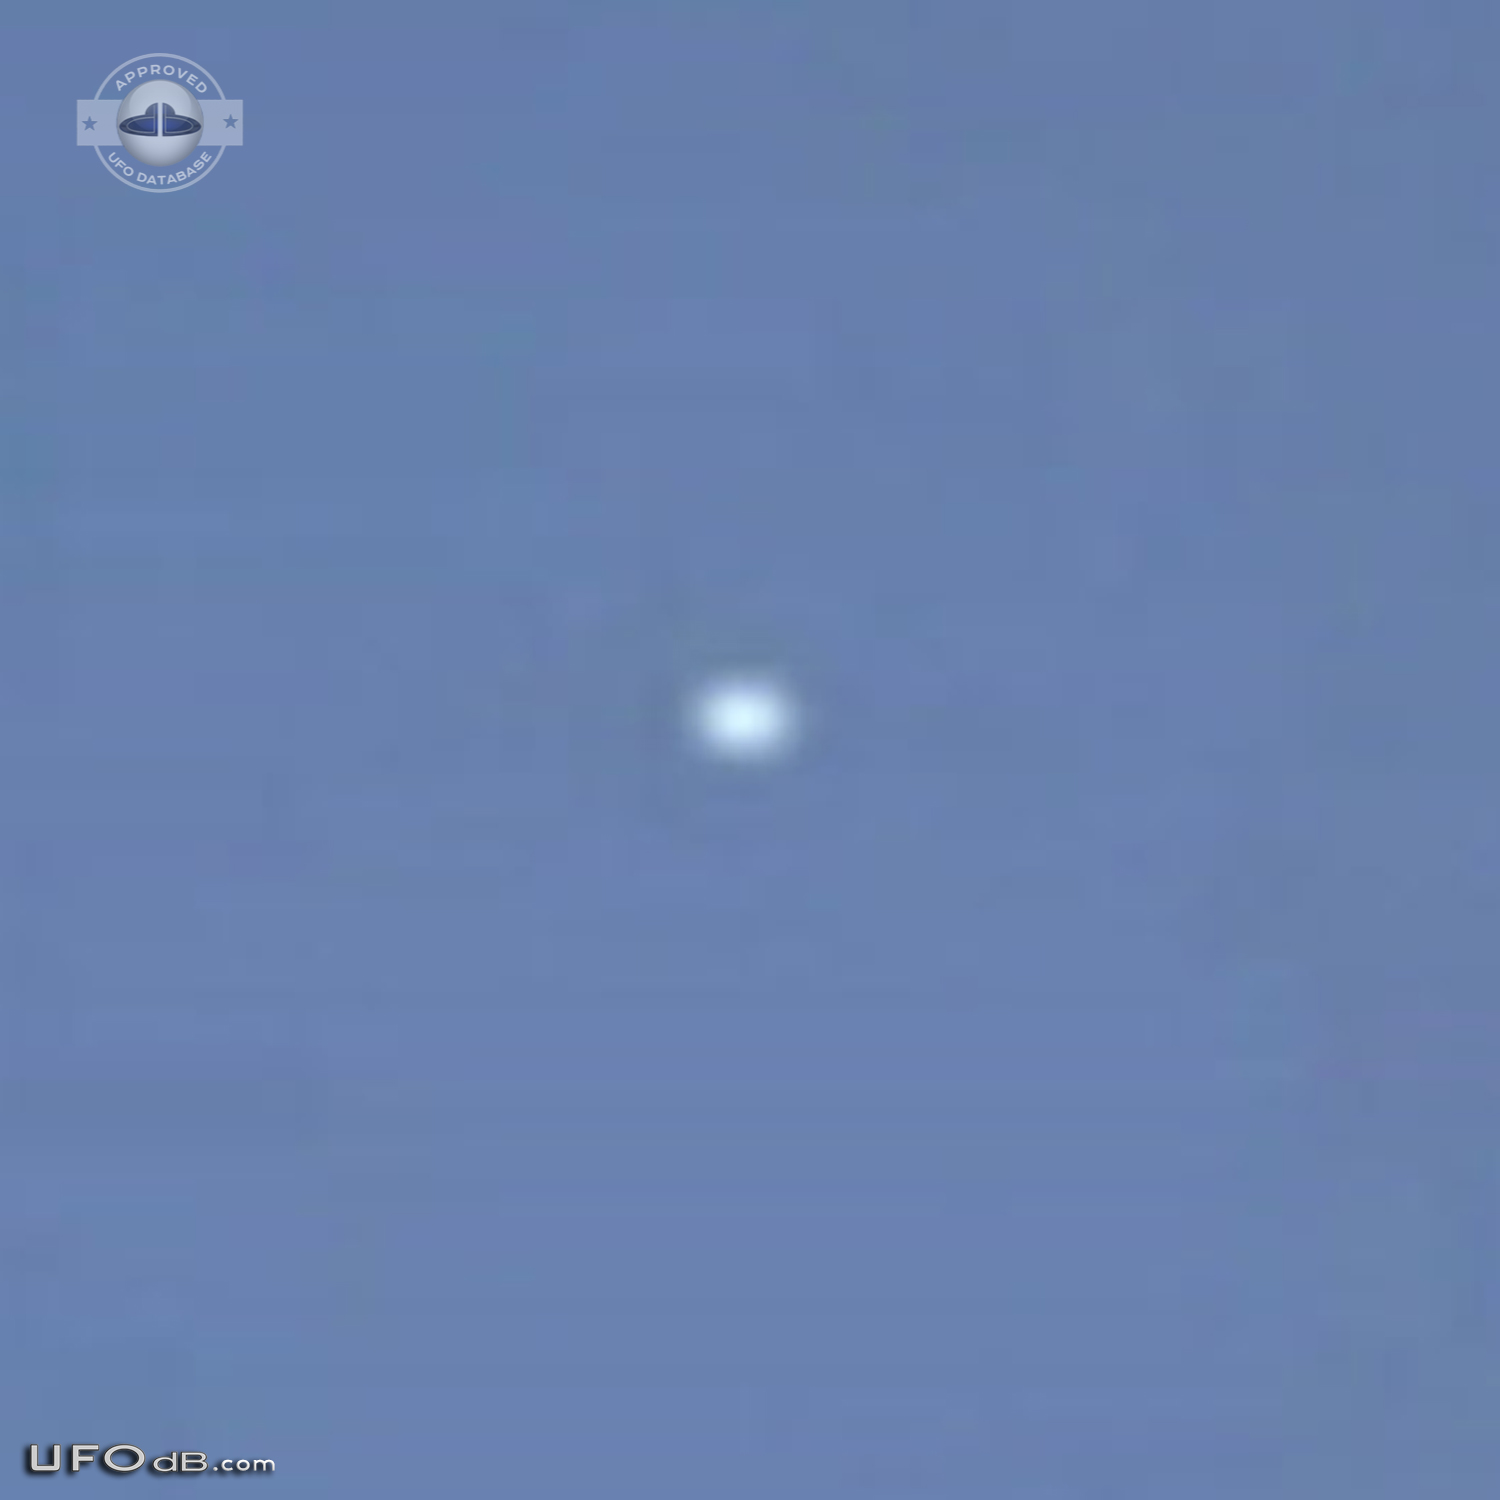 White spherical UFO in Ontario caught on picture Kitchener Canada 2012 UFO Picture #417-3